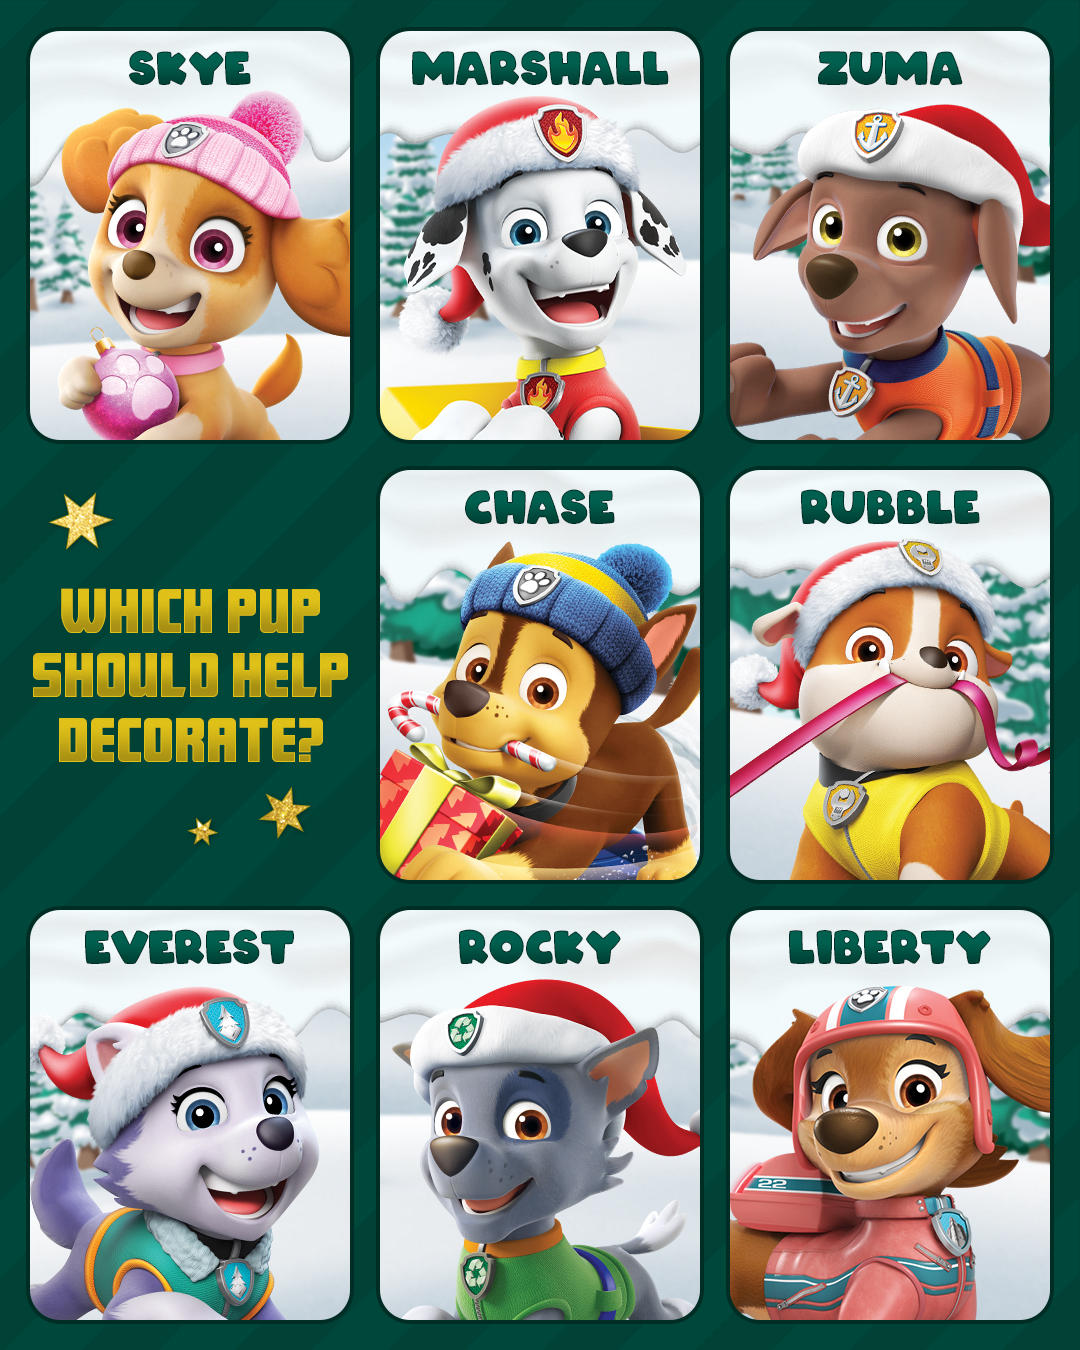 PAW Patrol - Which pup would you pick to help decorate